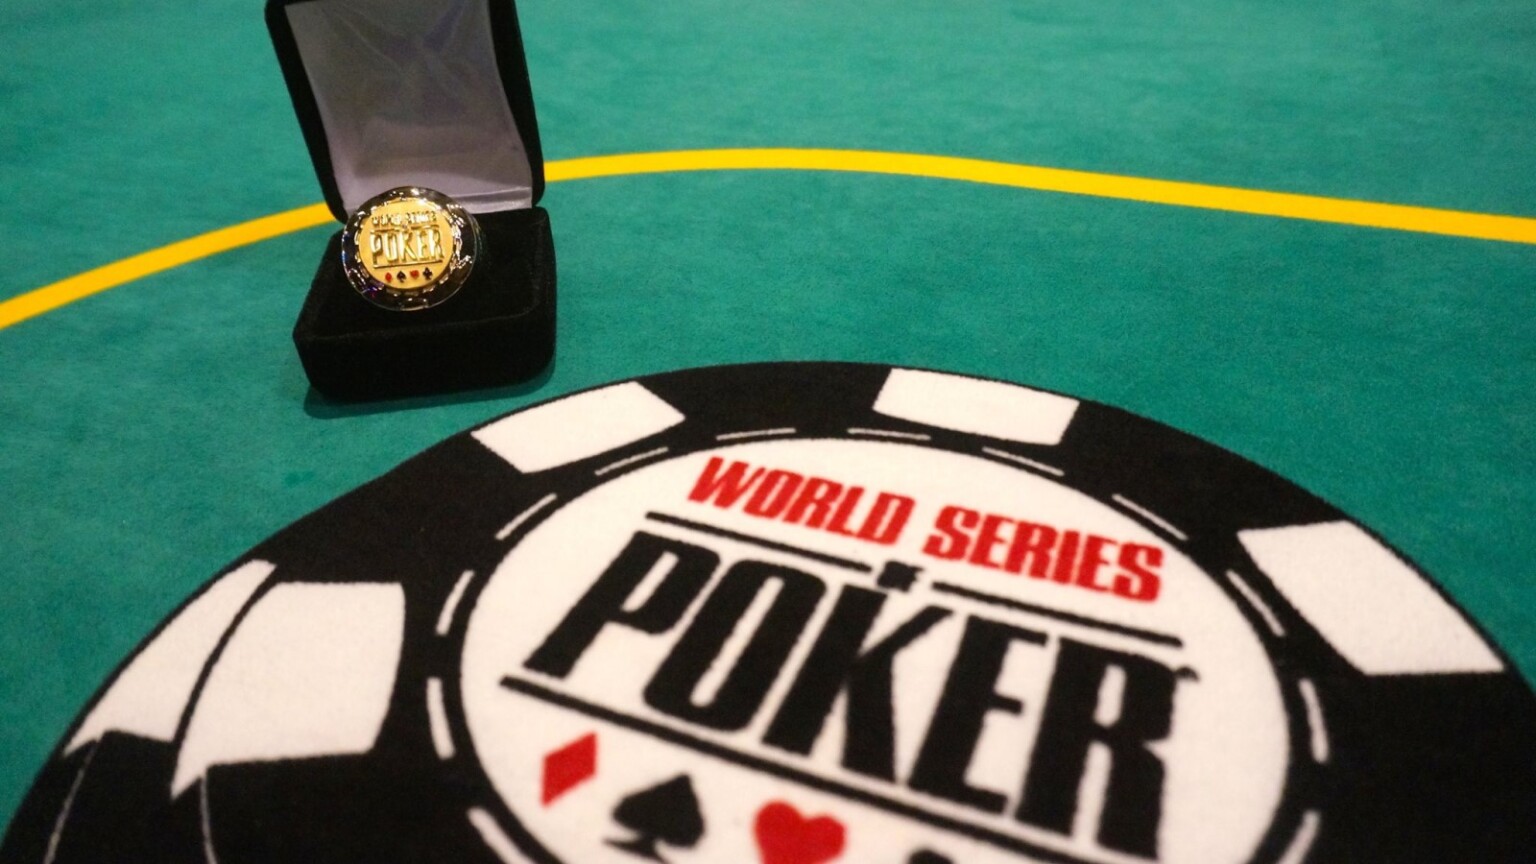 How to Watch World Series of Poker 2019 Online Without Cable